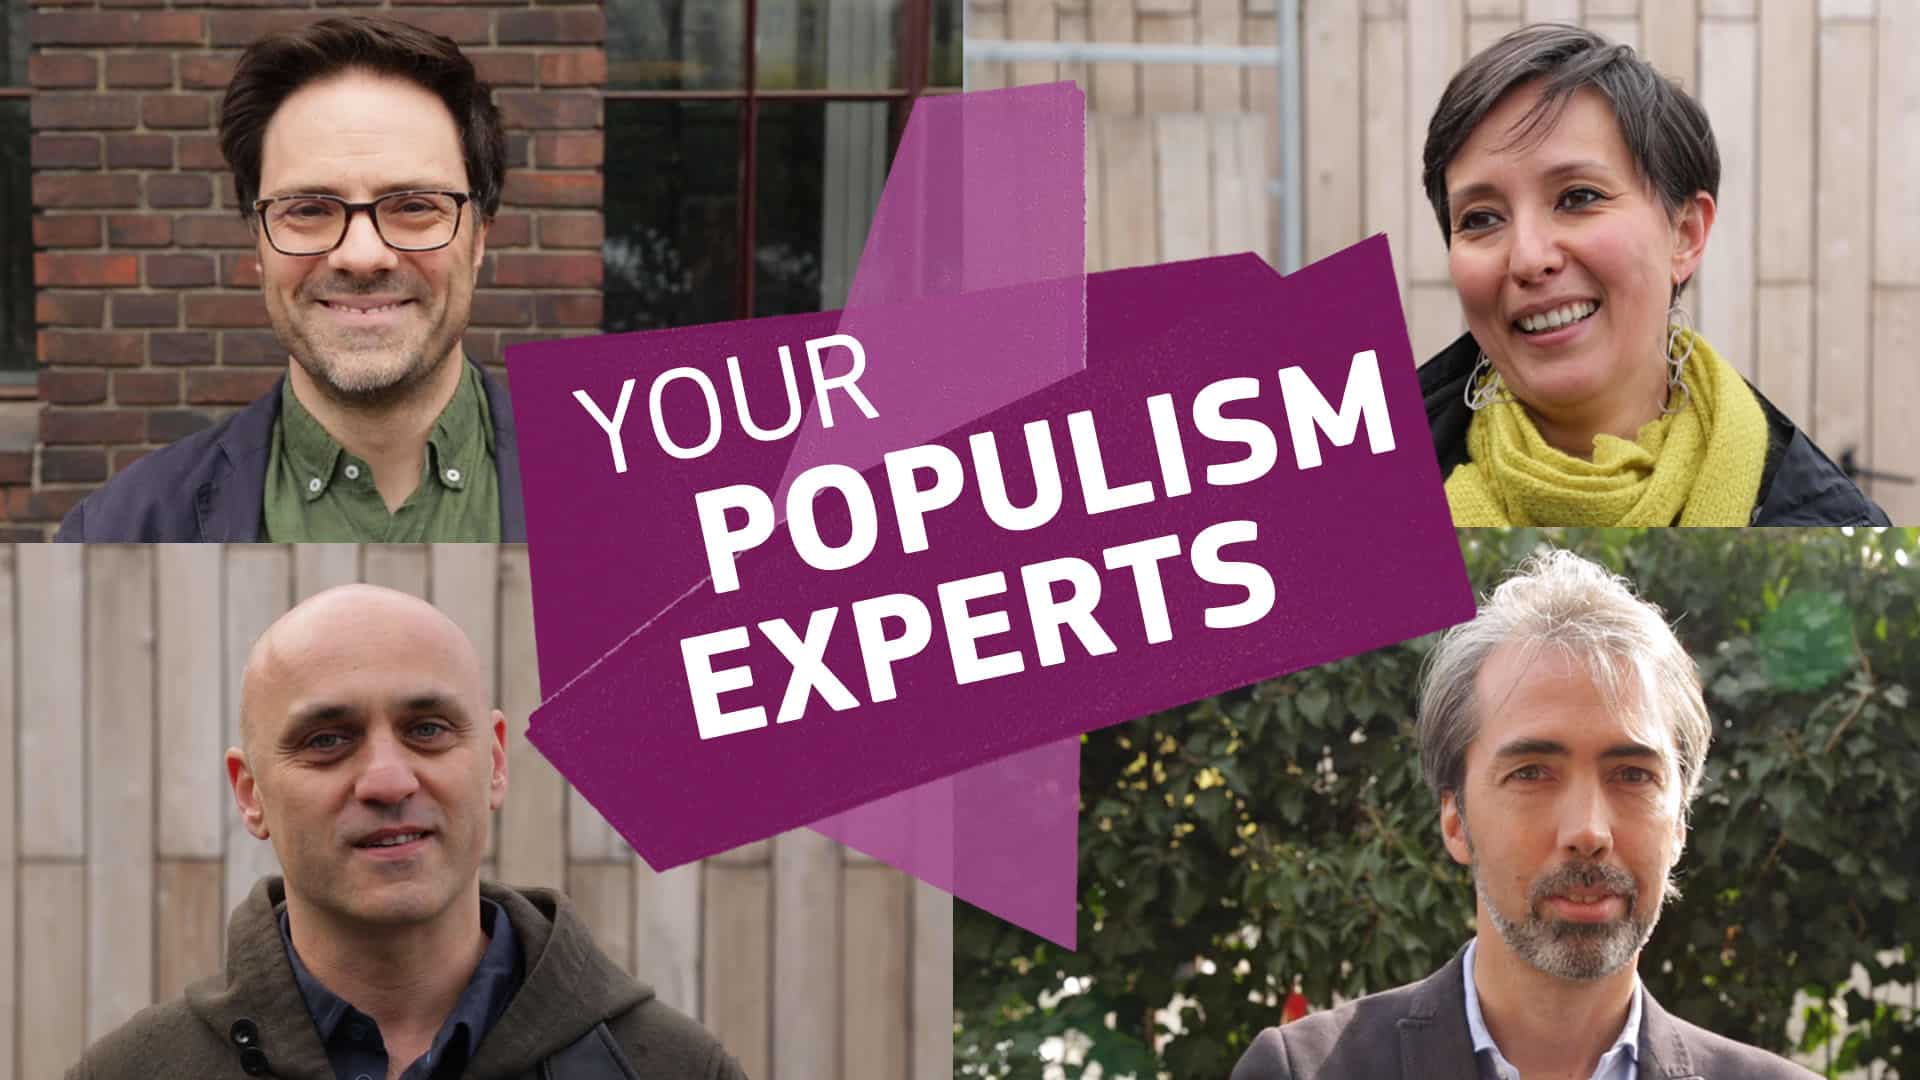 Israel Butler, Sinem Adar, Ertuğ Tombuş, and Oliviero Angeli with text overlay "Your Populism Experts"